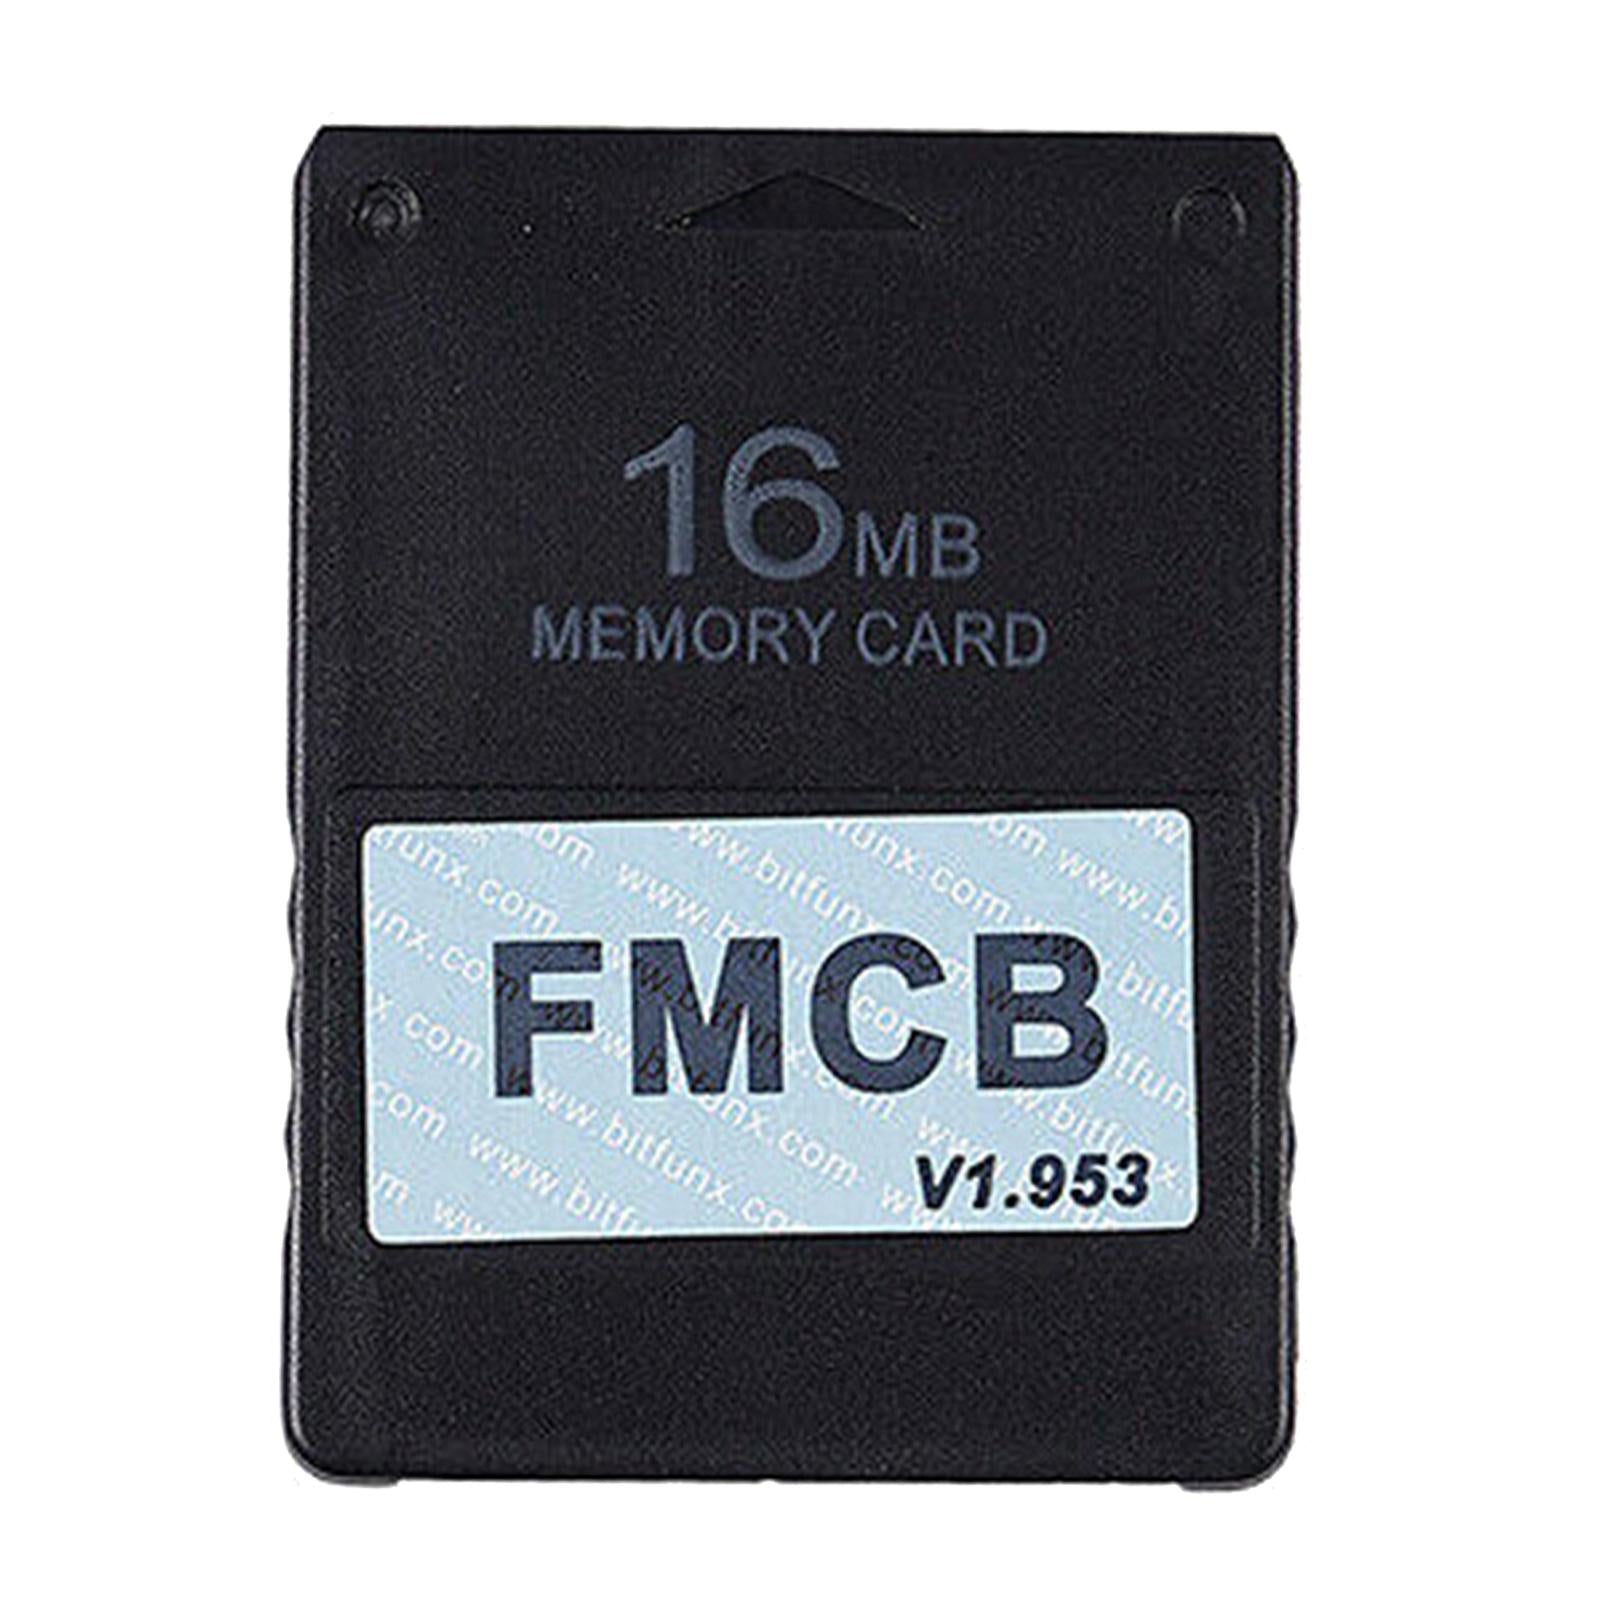 Free McBoot FMCB 1.953 Memory Card for Sony PS2 Replacement 16MB